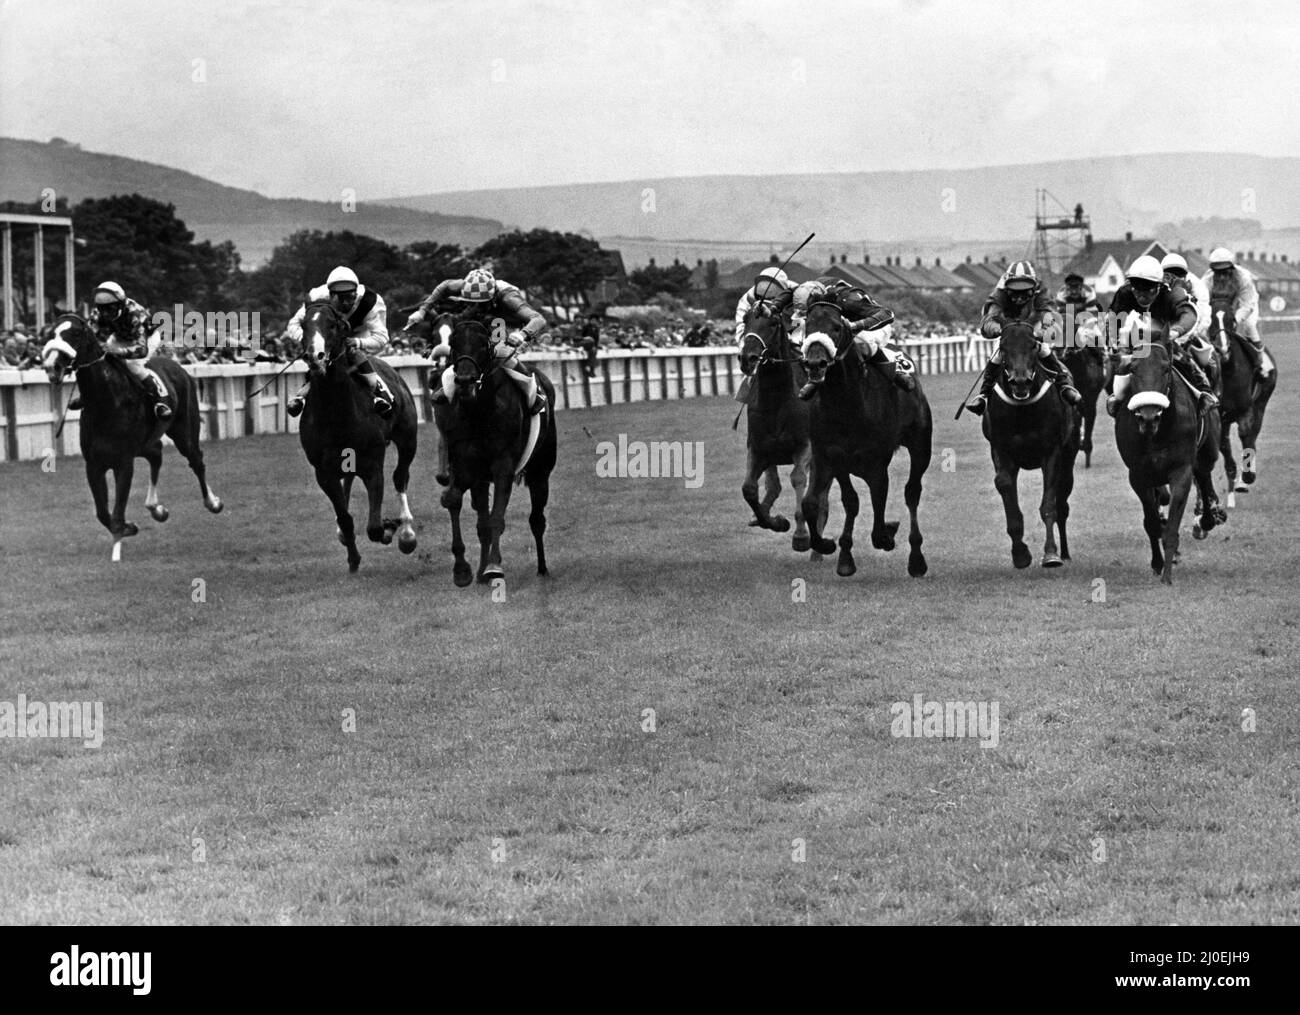 Redcar Racecourse is a thoroughbred horse racing venue located in Redcar, North Yorkshire. Circa 1979. Stock Photo